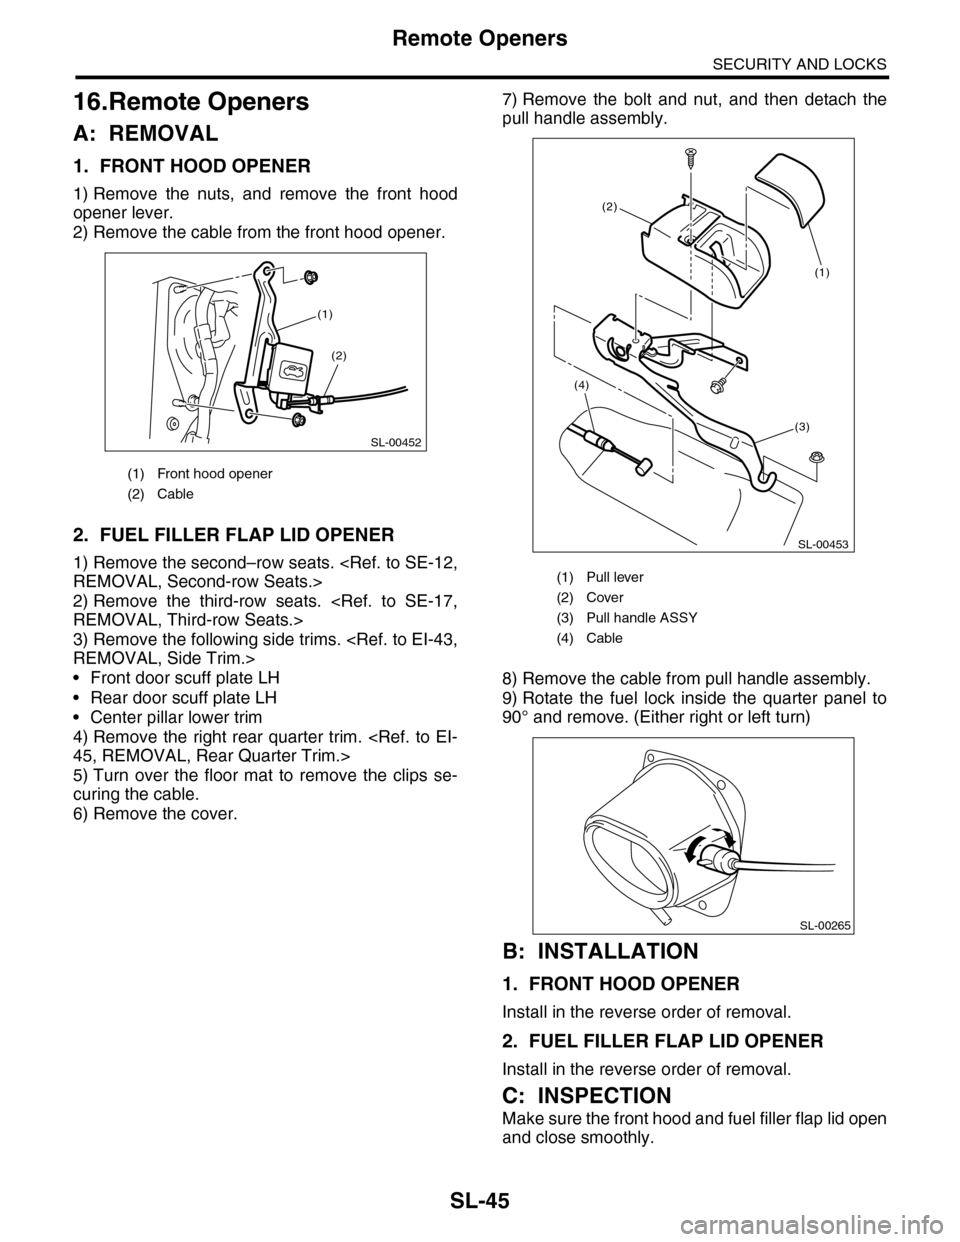 SUBARU TRIBECA 2009 1.G Service Workshop Manual SL-45
Remote Openers
SECURITY AND LOCKS
16.Remote Openers
A: REMOVAL
1. FRONT HOOD OPENER
1) Remove  the  nuts,  and  remove  the  front  hood
opener lever.
2) Remove the cable from the front hood ope